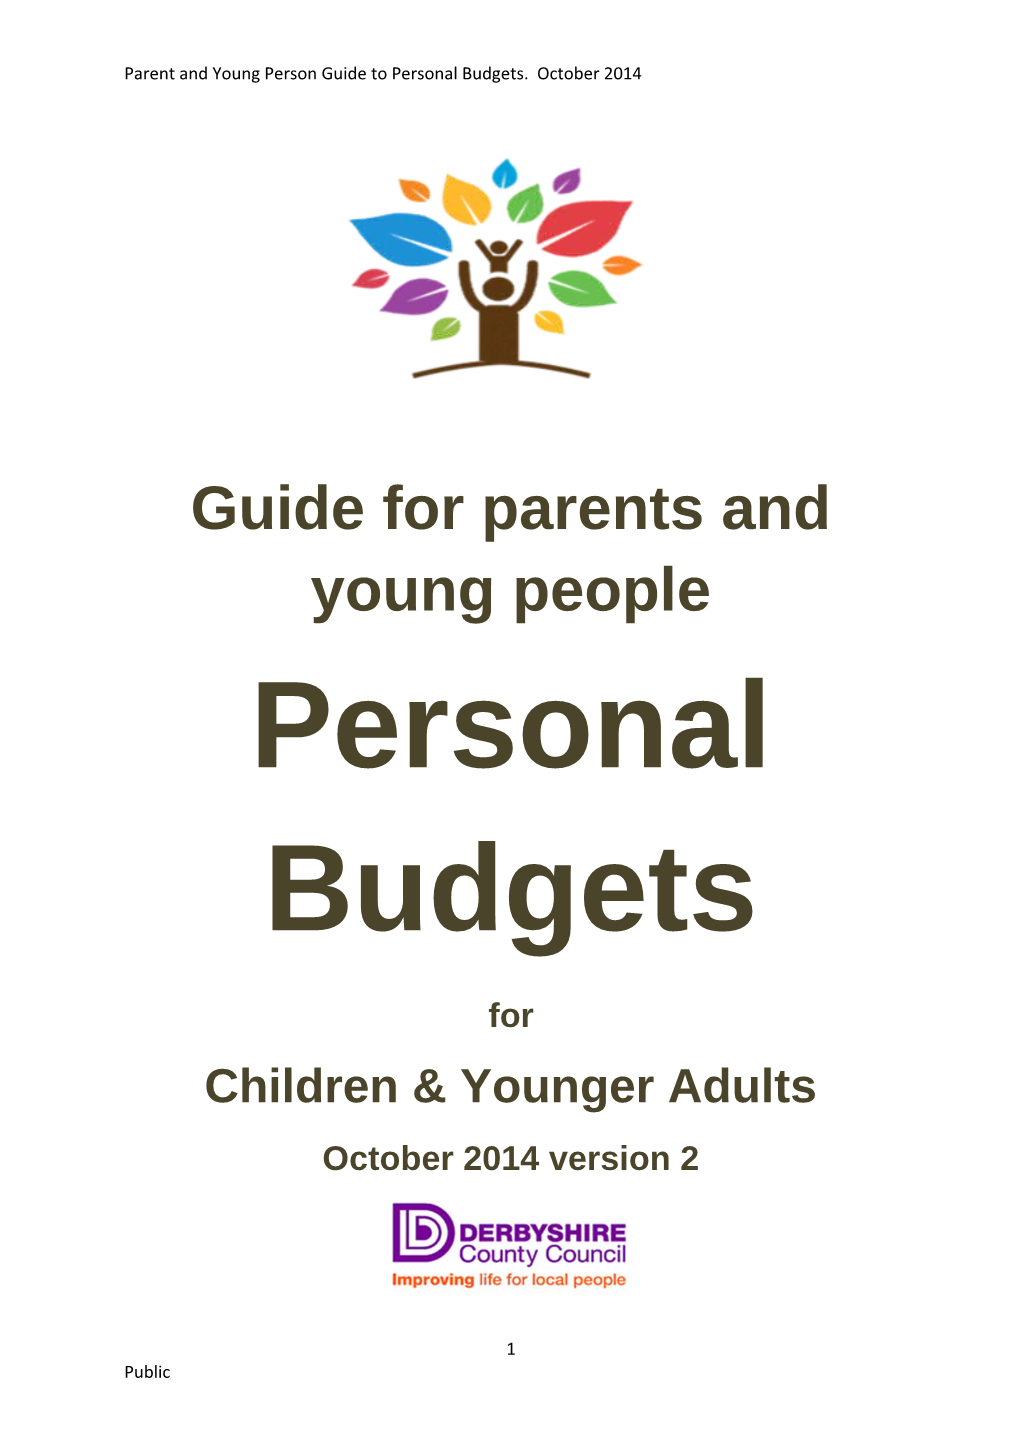 Personal Budgets Guide for Children and Young Adults